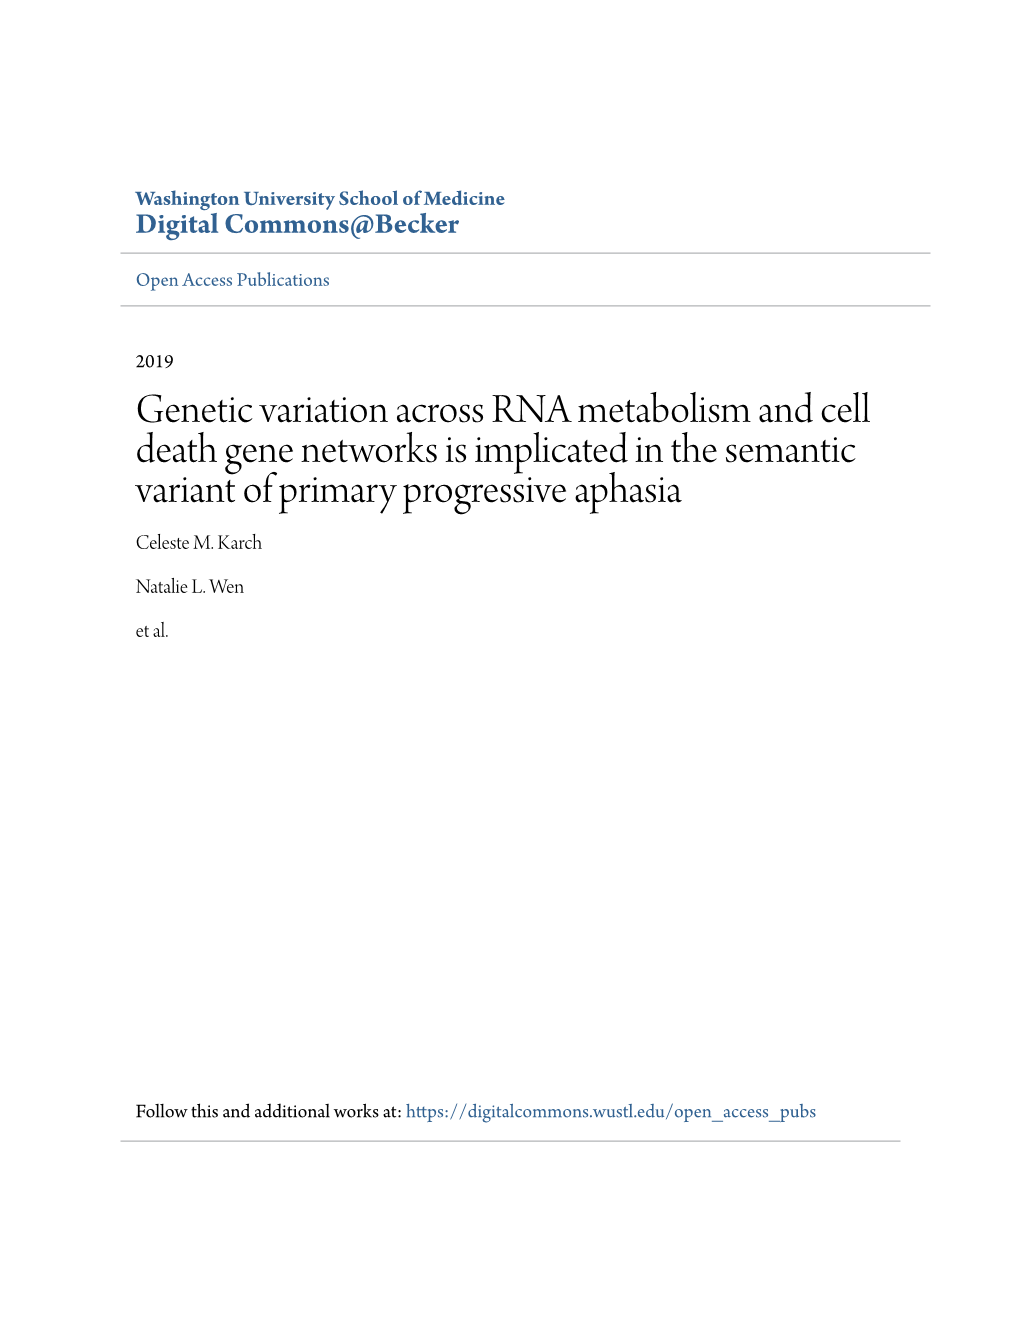 Genetic Variation Across RNA Metabolism and Cell Death Gene Networks Is Implicated in the Semantic Variant of Primary Progressive Aphasia Celeste M